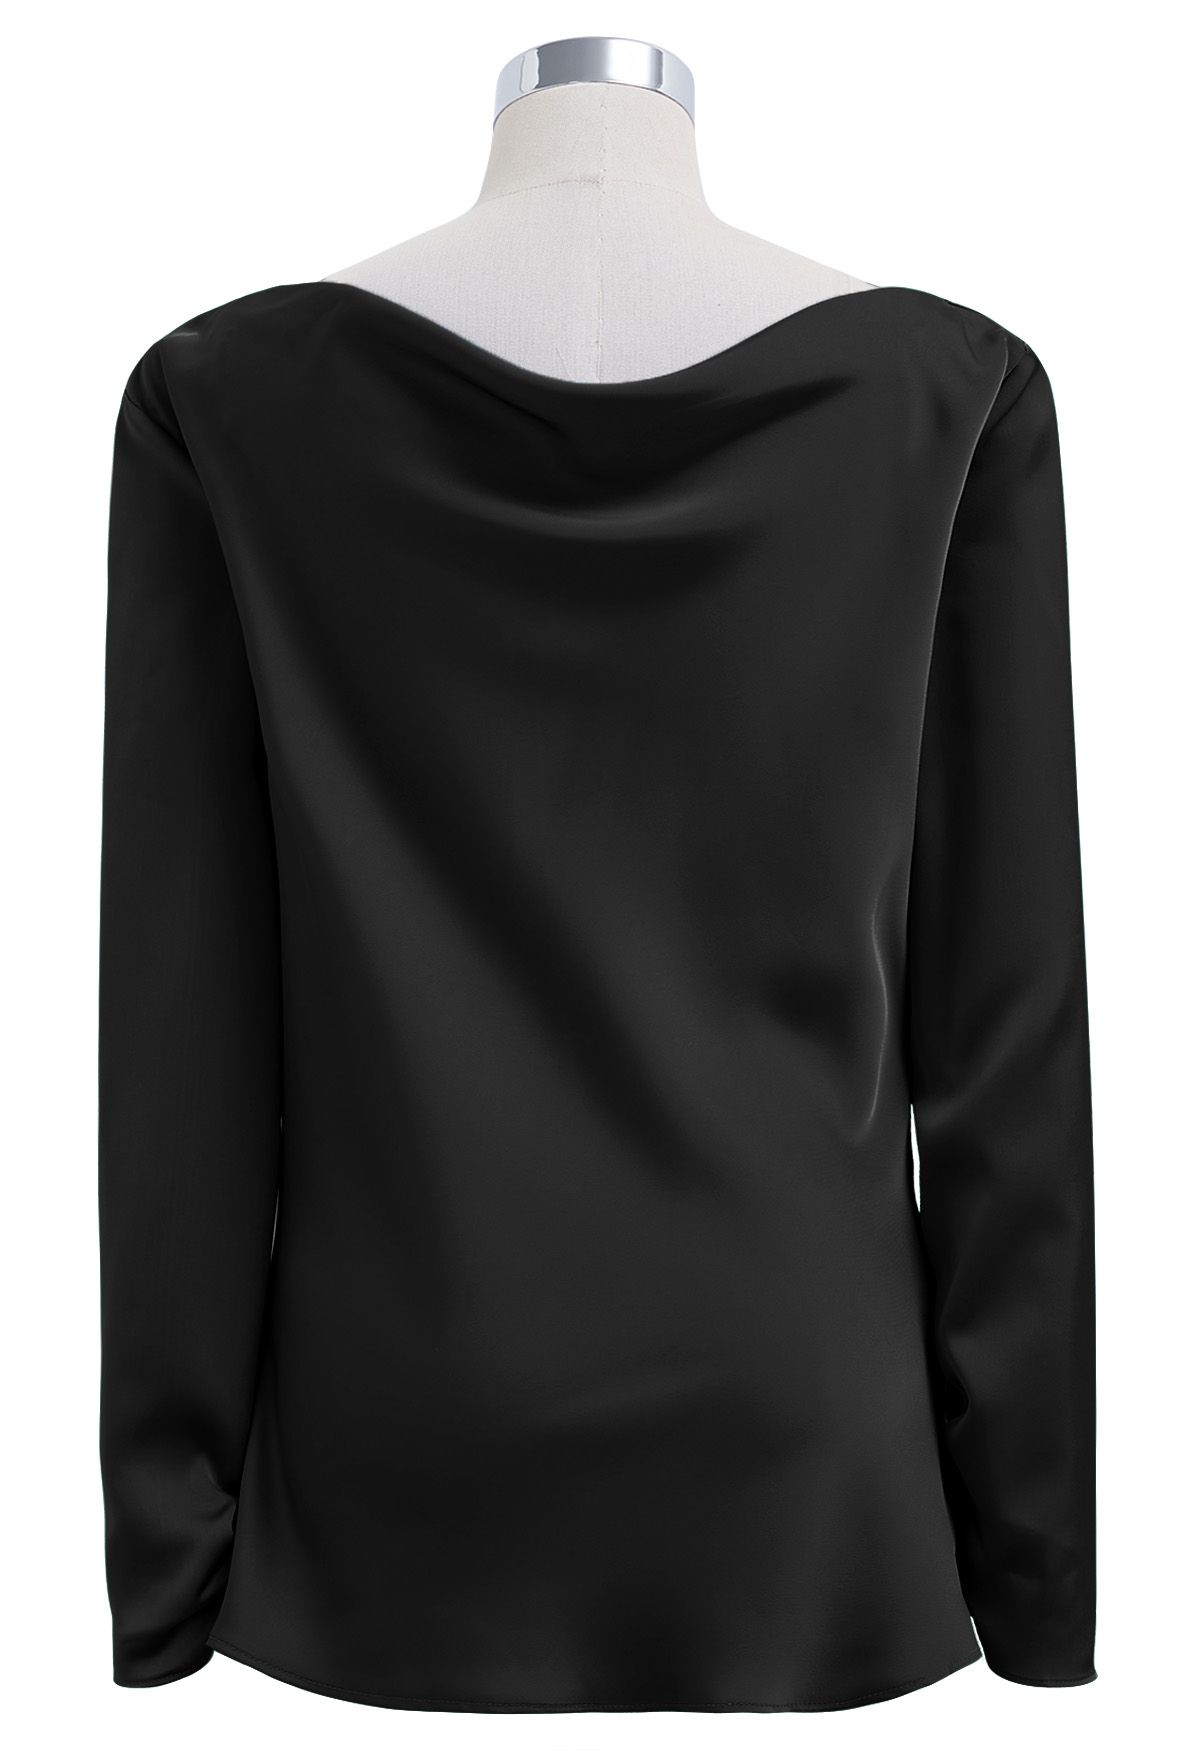 Asymmetric Ruched Satin Long Sleeve Top in Black